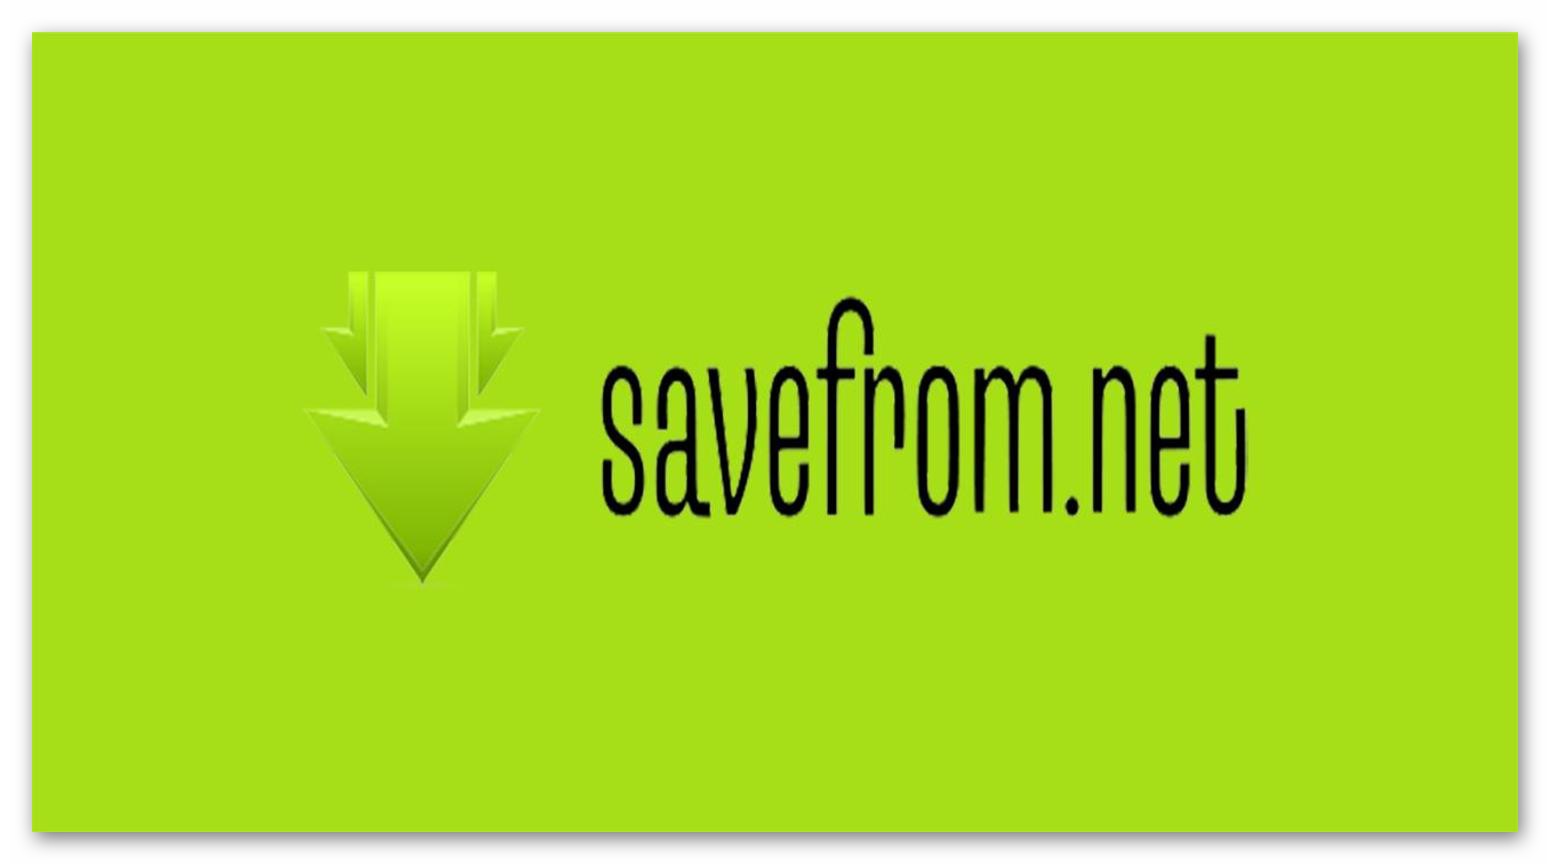 En extensions details savefromnet helper. Savefrom. Safe from. Savefrom.net картинки. Savefrom иконка.